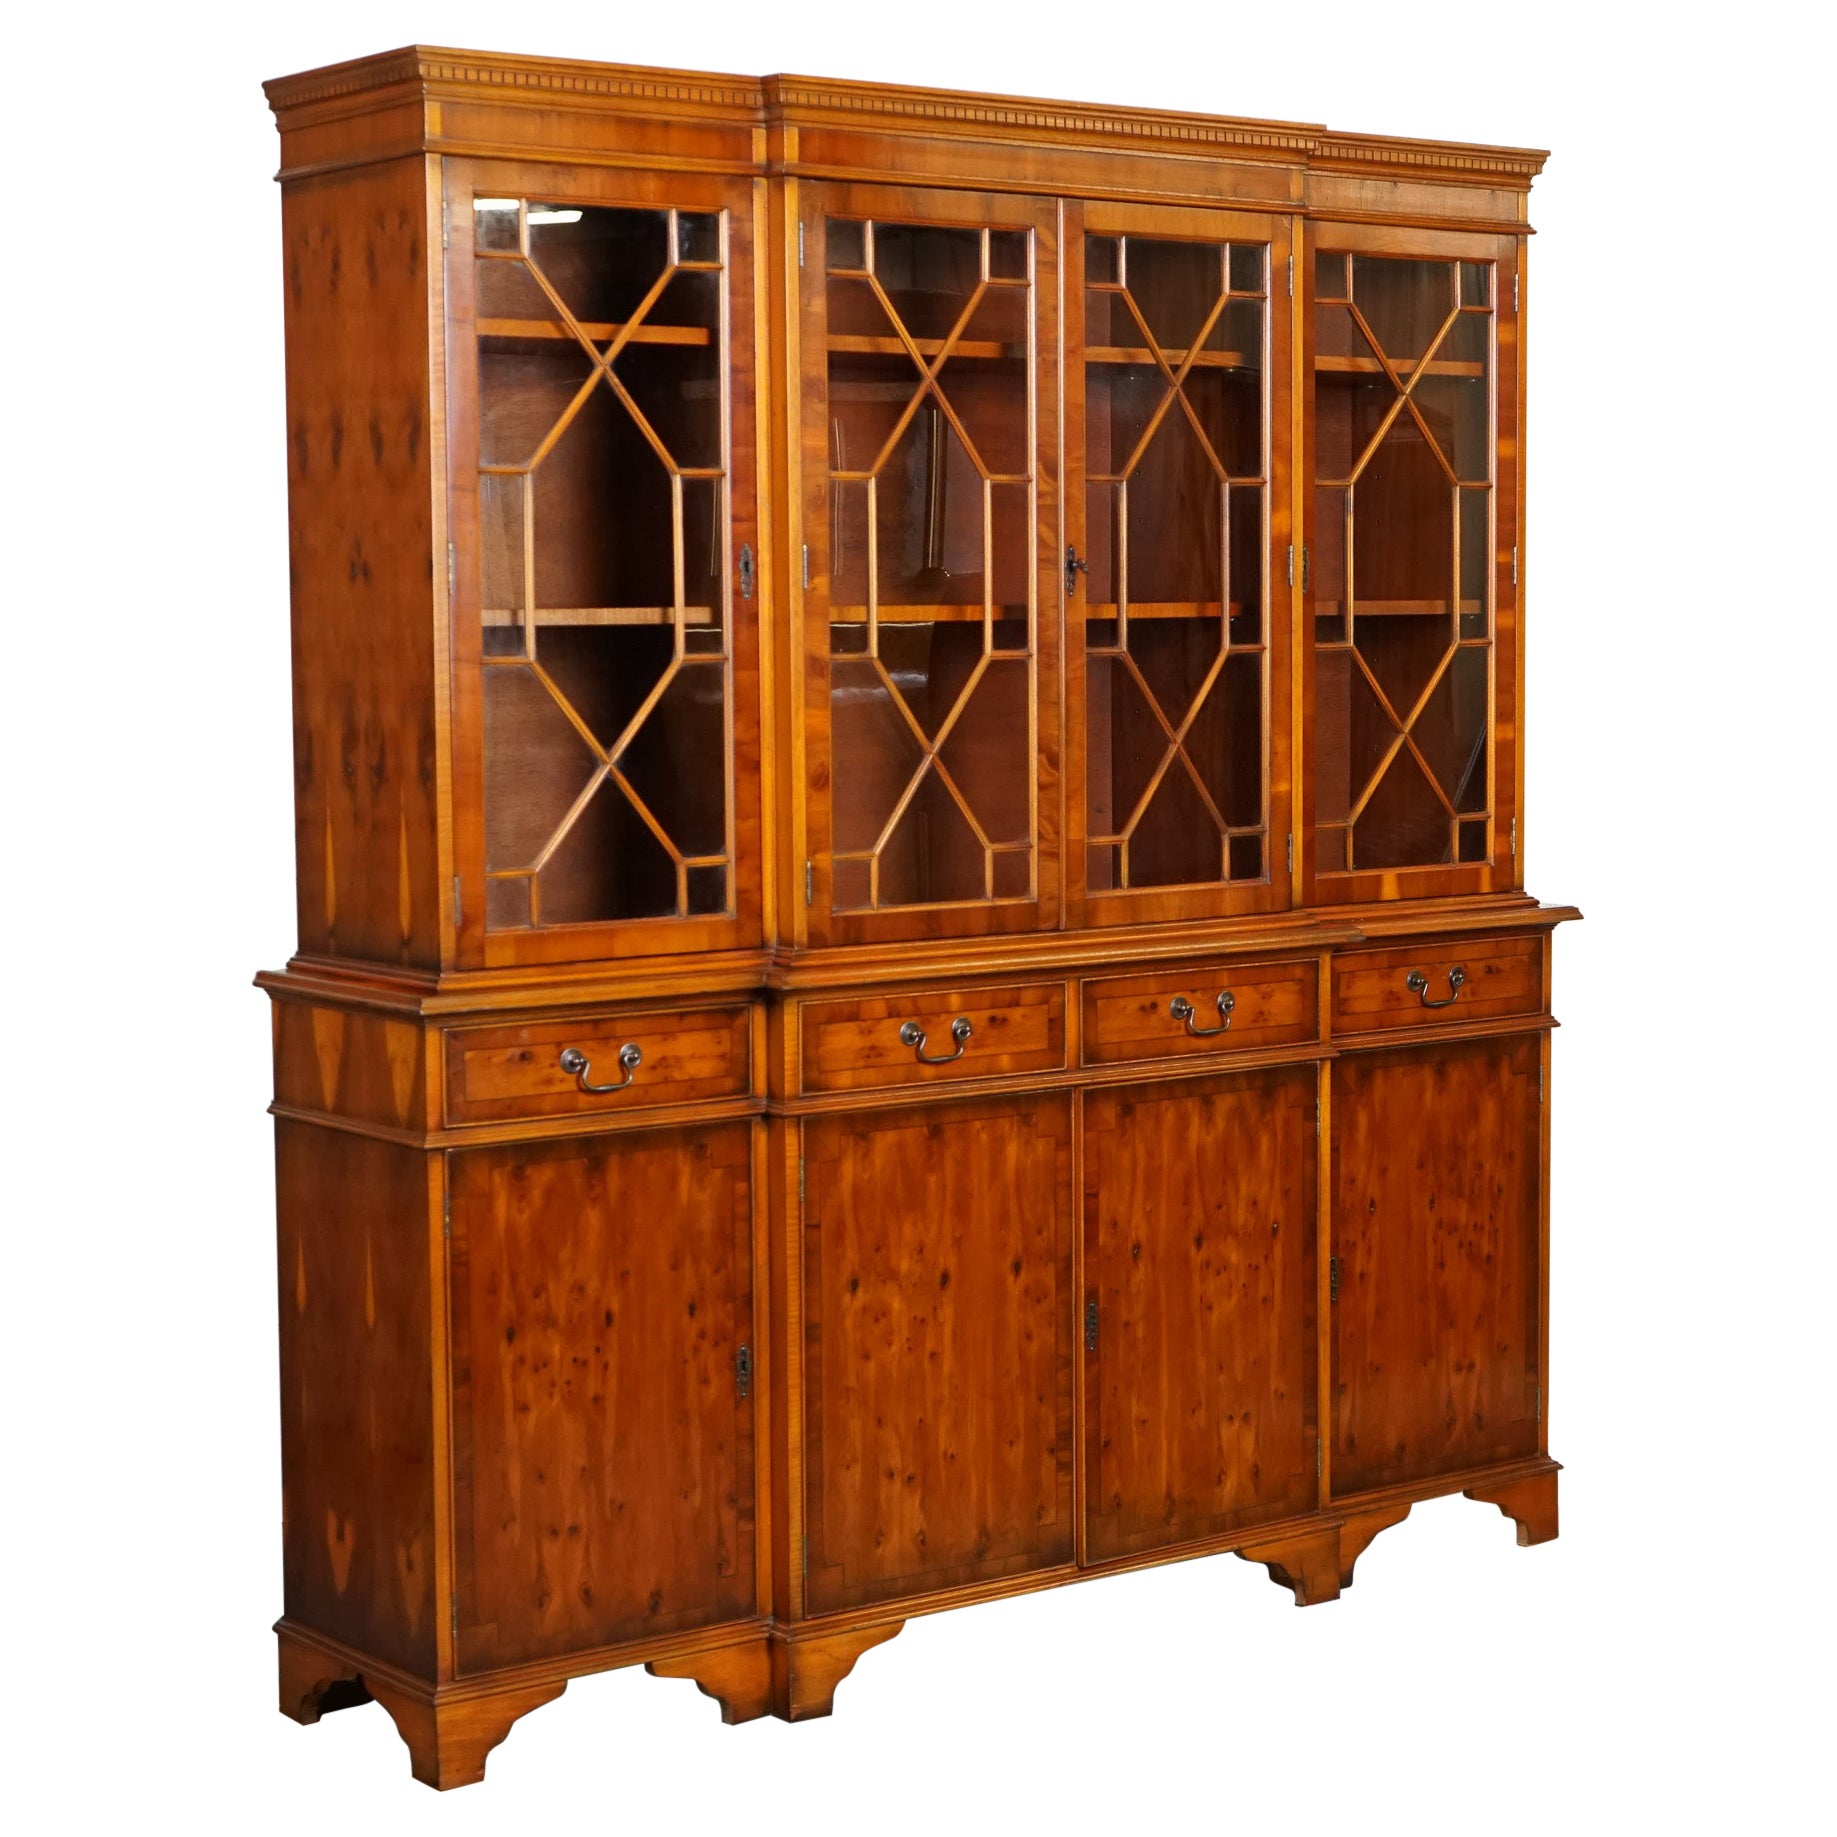 STUNNING VINTAGE BURR YEW WOOD DISPLAY CABiNET BOOKCASE BY CHARLES BARR J1 For Sale